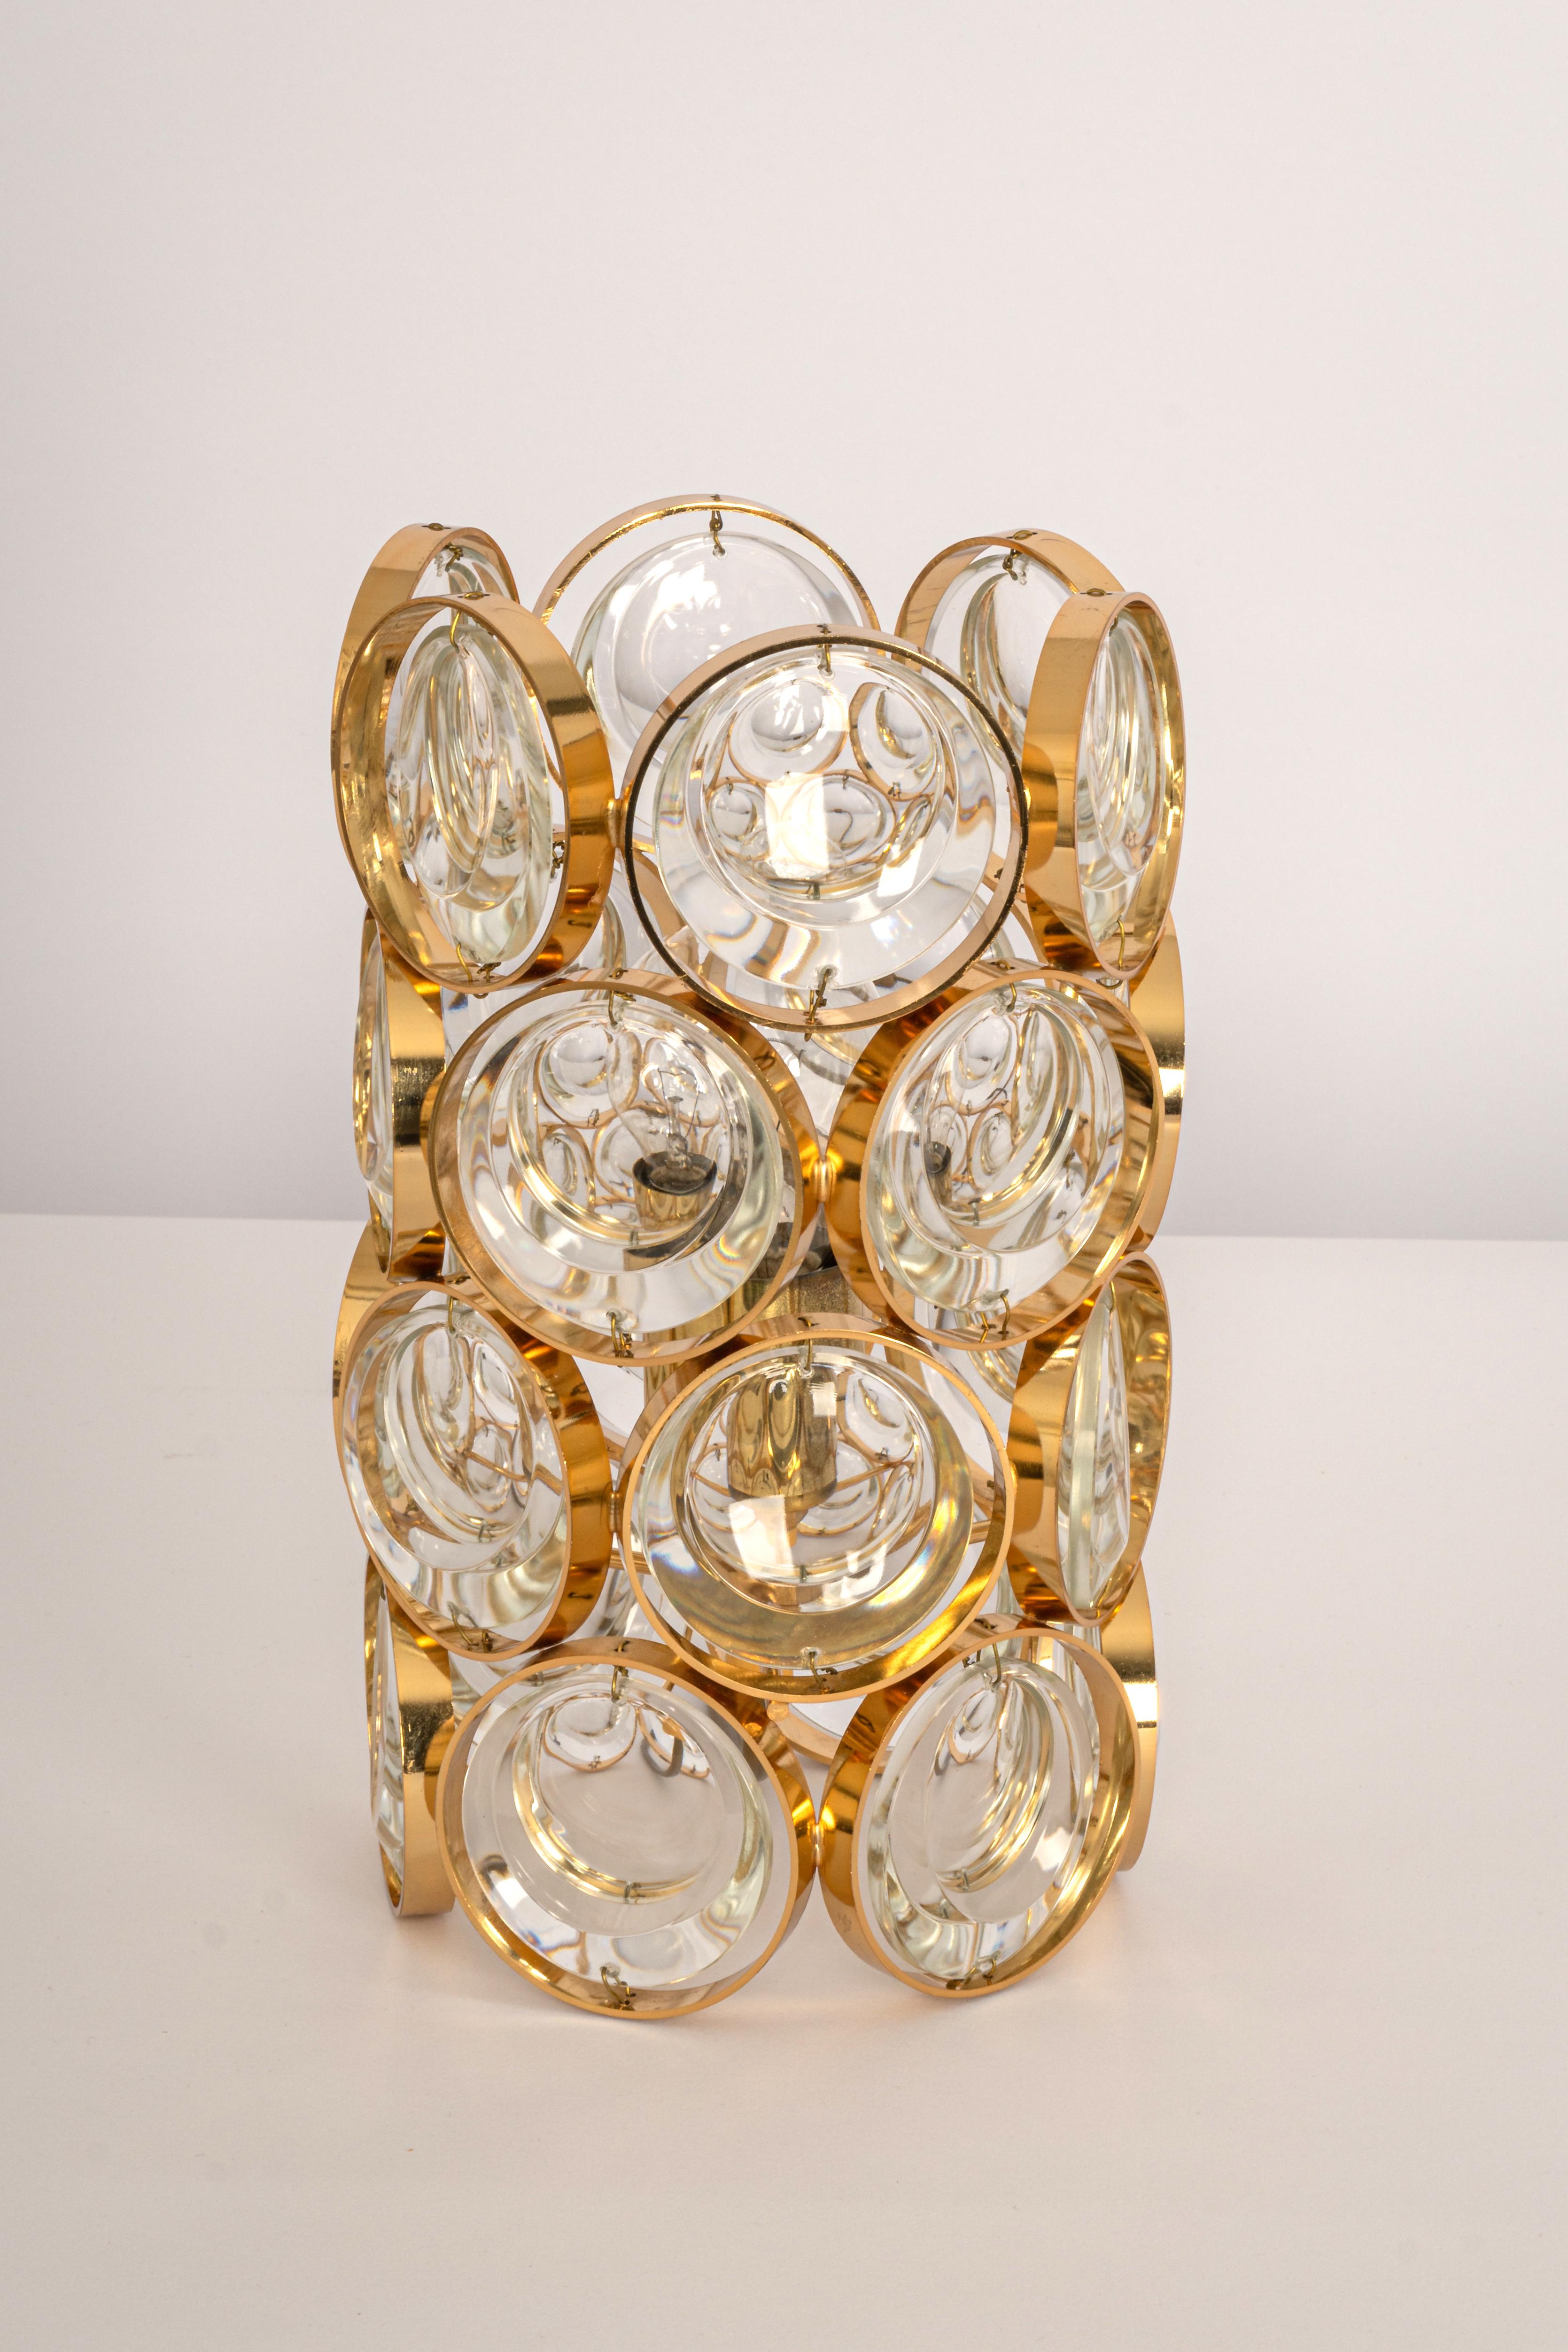 Designer table lamp by Palwa, in the style of Sciolari, Germany, 1960s
Gilded brass frame and crystal glass rings.

Sockets: The table lamp needs one x E27 standard bulb to illuminate.
Light bulbs are not included. It is possible to install this